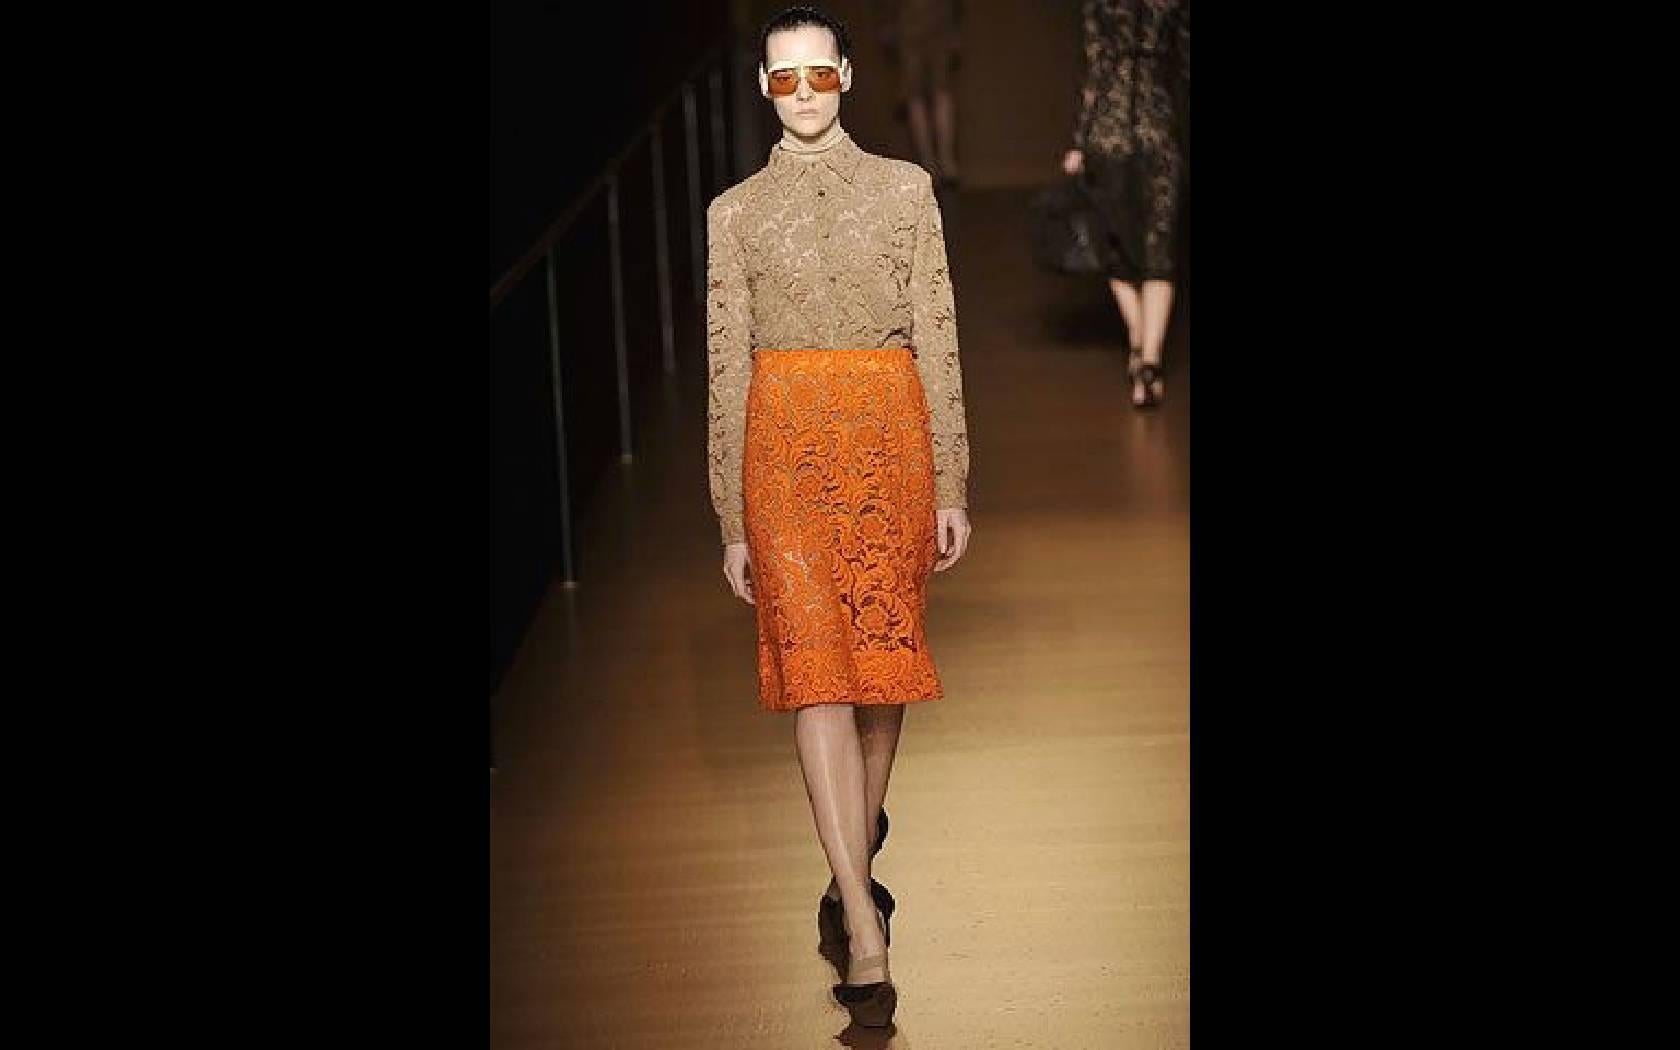  F/W 2008 Orange Guipure lace skirt by Prada.

The skirt is unlined and closes at the left side with four snaps and a large hook and eye. 
The waist is finished with  grosgrain ribbon. Comes with a silk Prada slip. 

Size estimate: S
Size: 36
Waist: